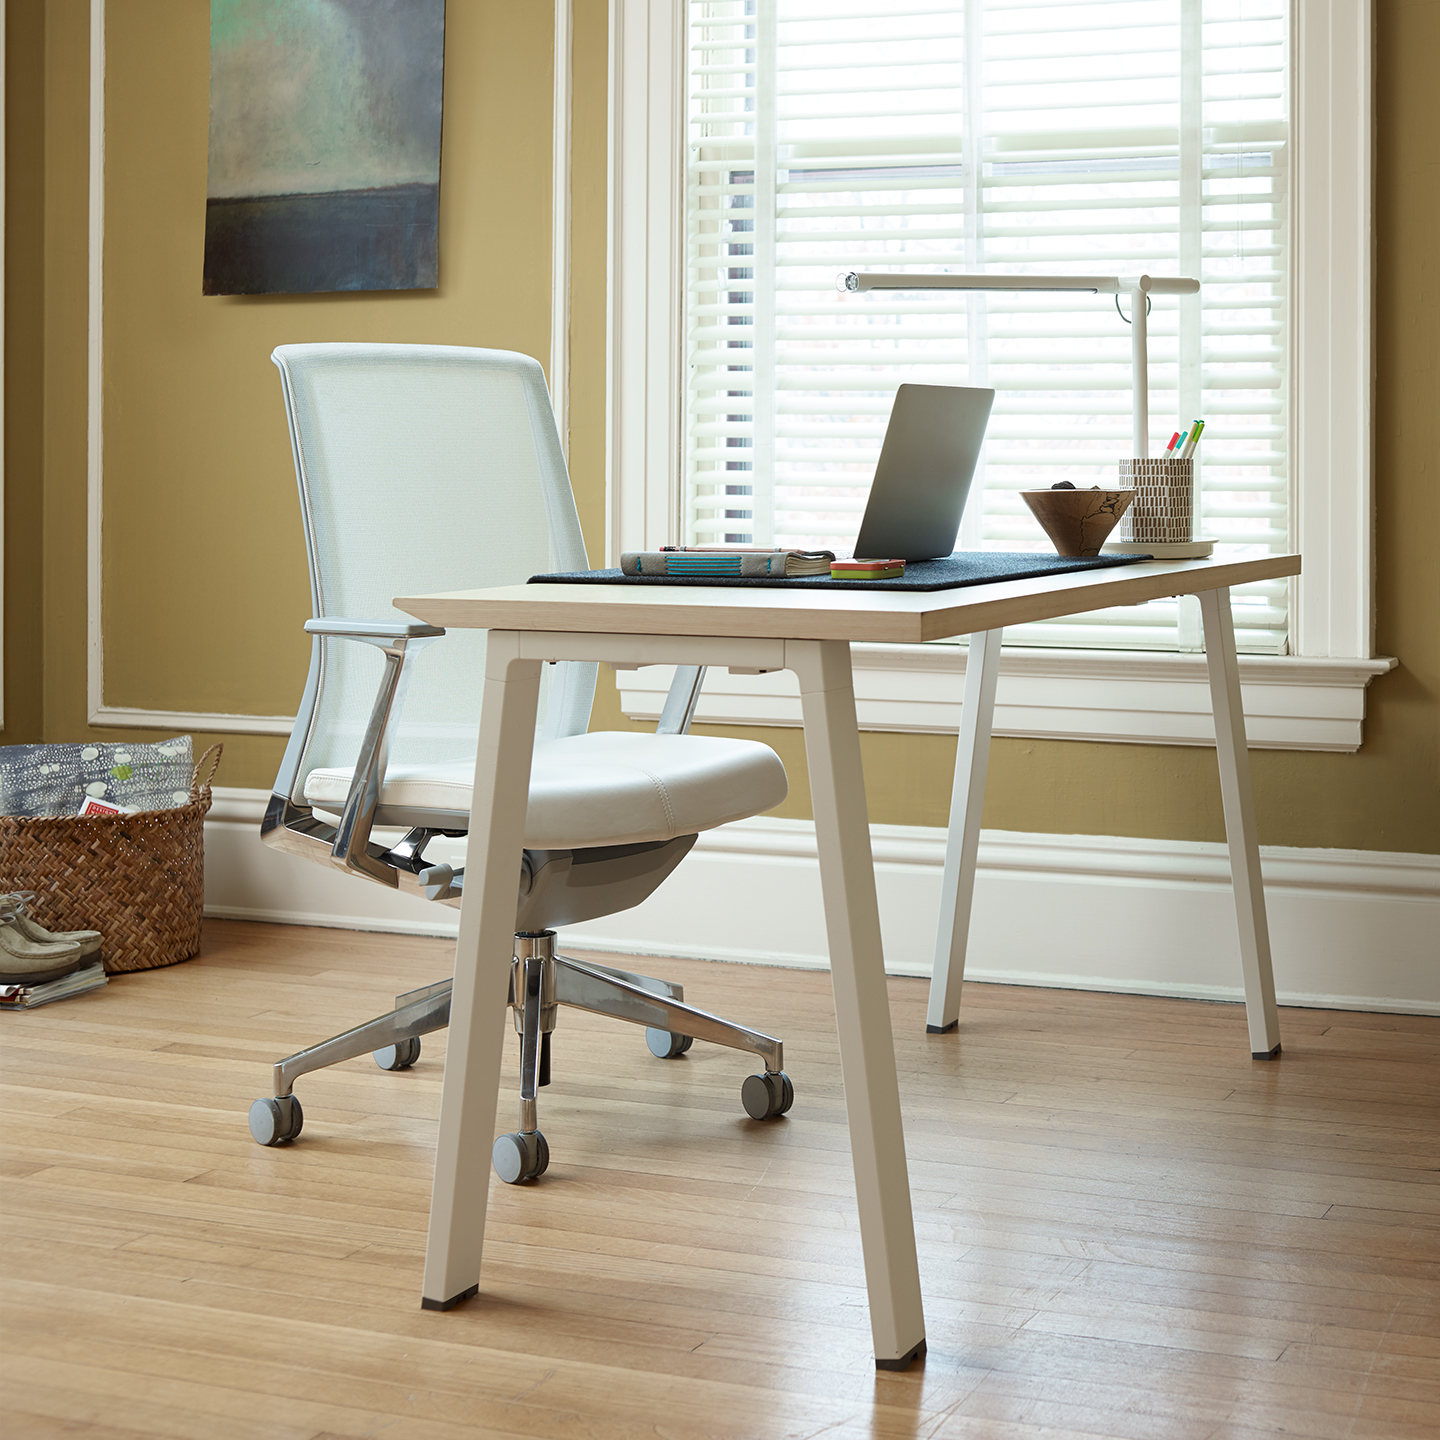 Haworth Reside Workspace in a home office for a laptop space with a haworth chair with it